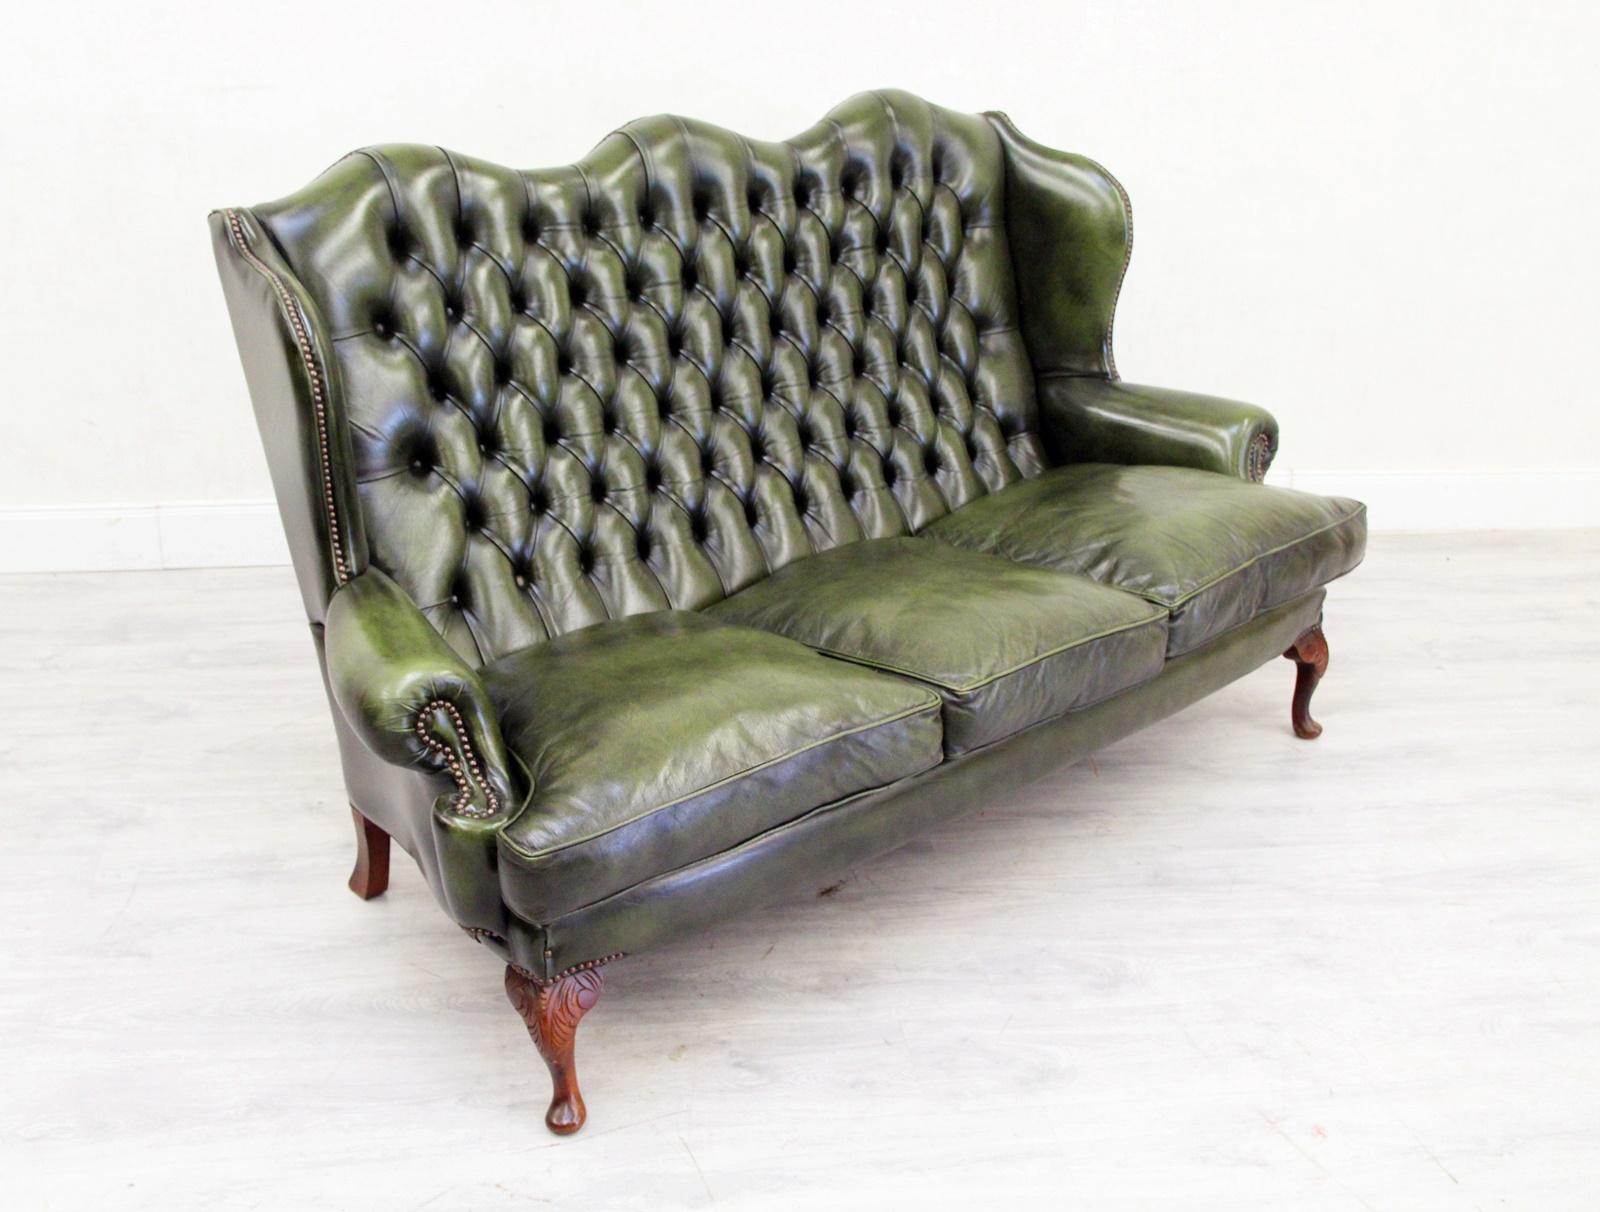 Chesterfield Vintage Chippendale English Sofa Leder Antik Couch In Good Condition For Sale In Lage, DE